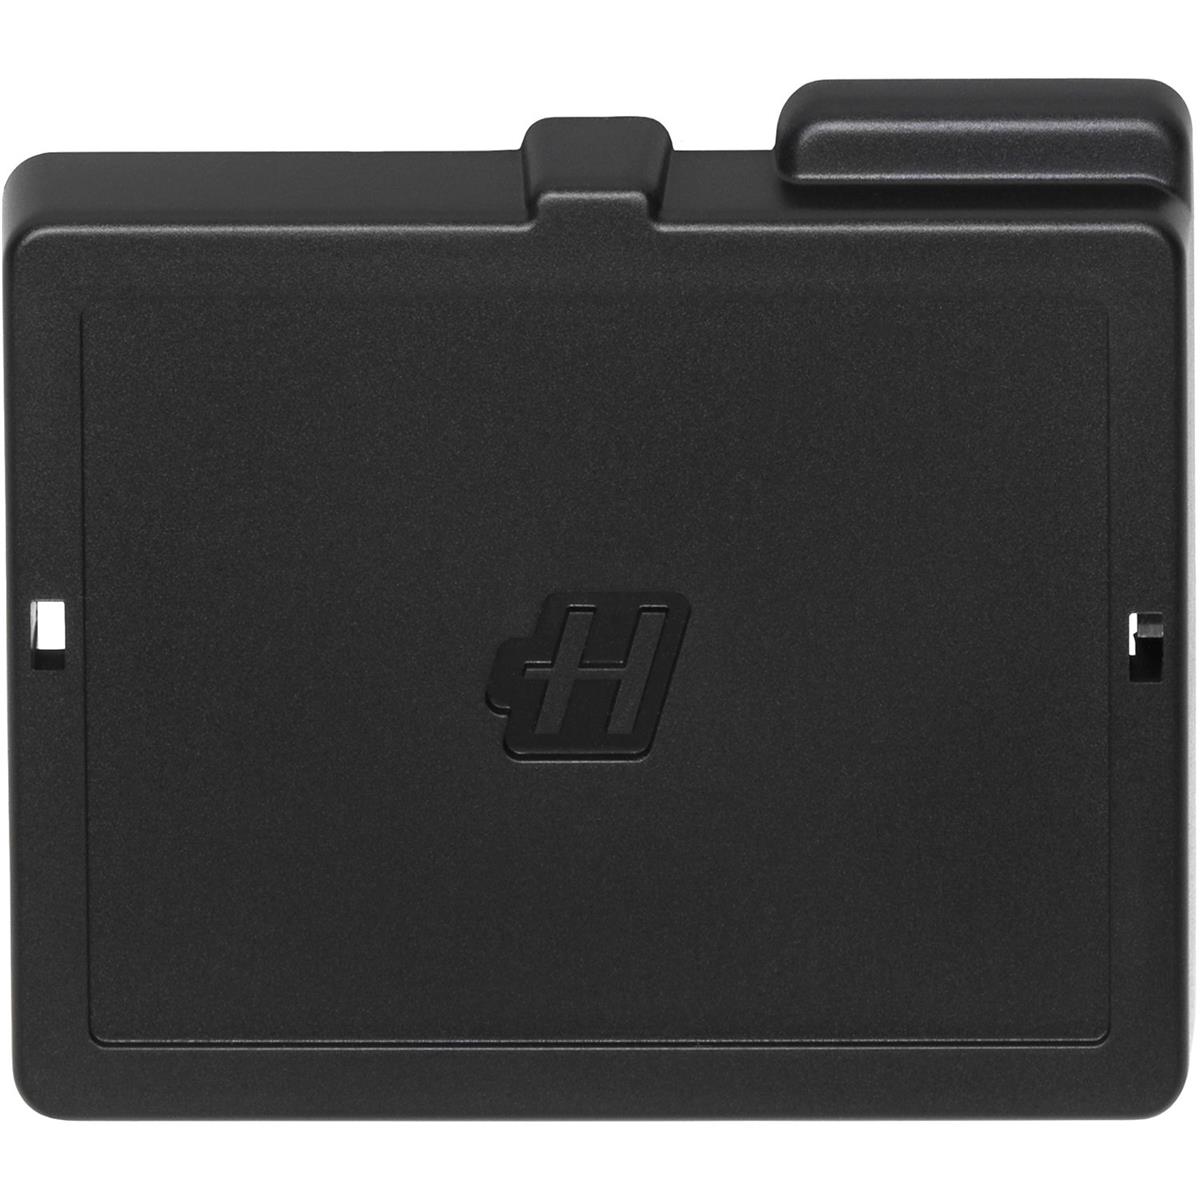 Image of Hasselblad Viewfinder Cover for H Series Cameras